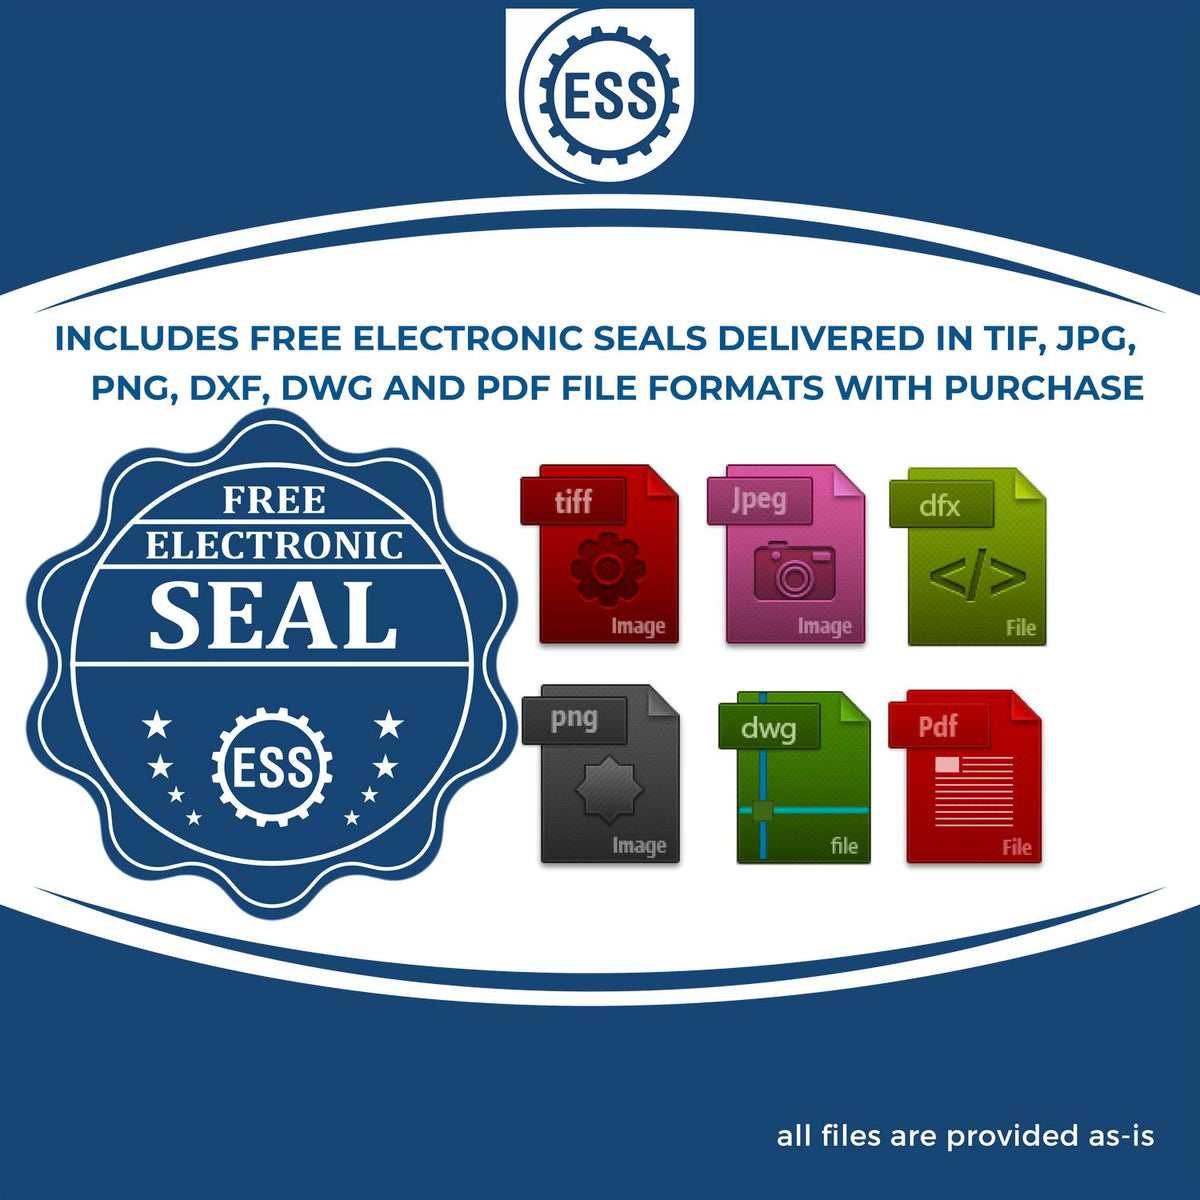 An infographic for the free electronic seal for the Slim Pre-Inked Idaho Professional Engineer Seal Stamp illustrating the different file type icons such as DXF, DWG, TIF, JPG and PNG.